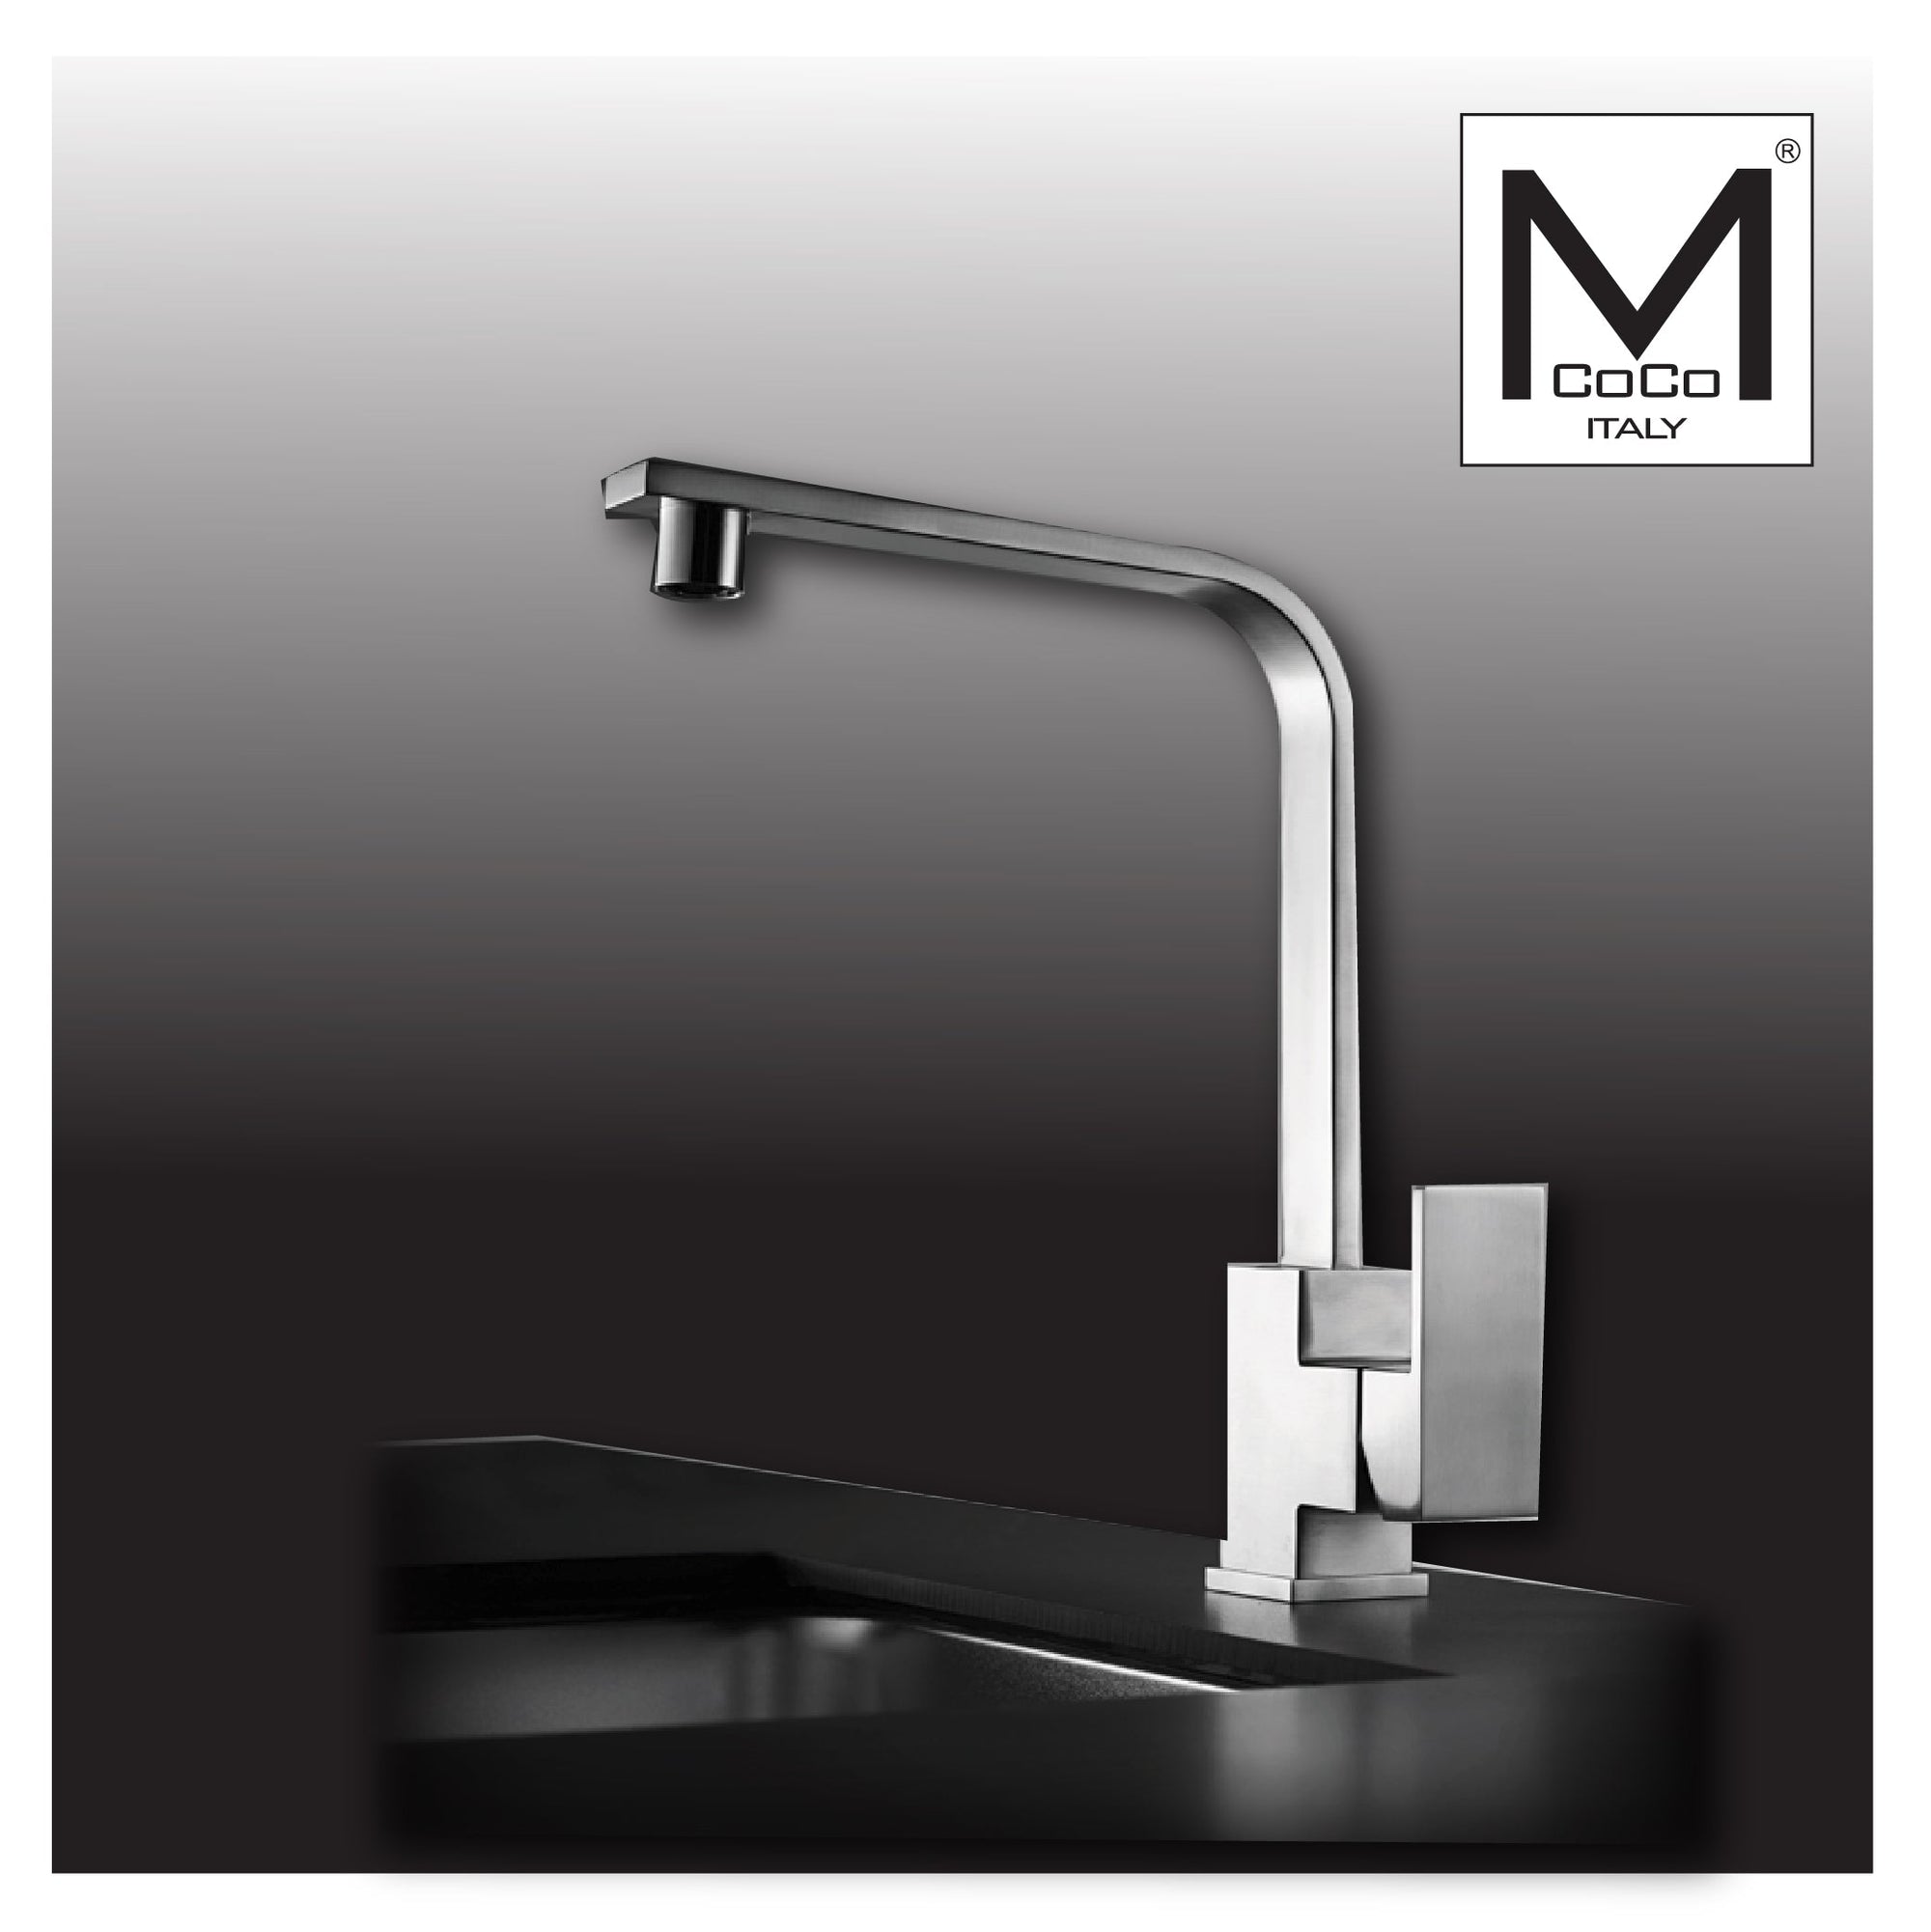 Stylish and functional Mcoco Taps by M. M. Noorbhoy & Co - High-quality water fixtures to enhance your space.